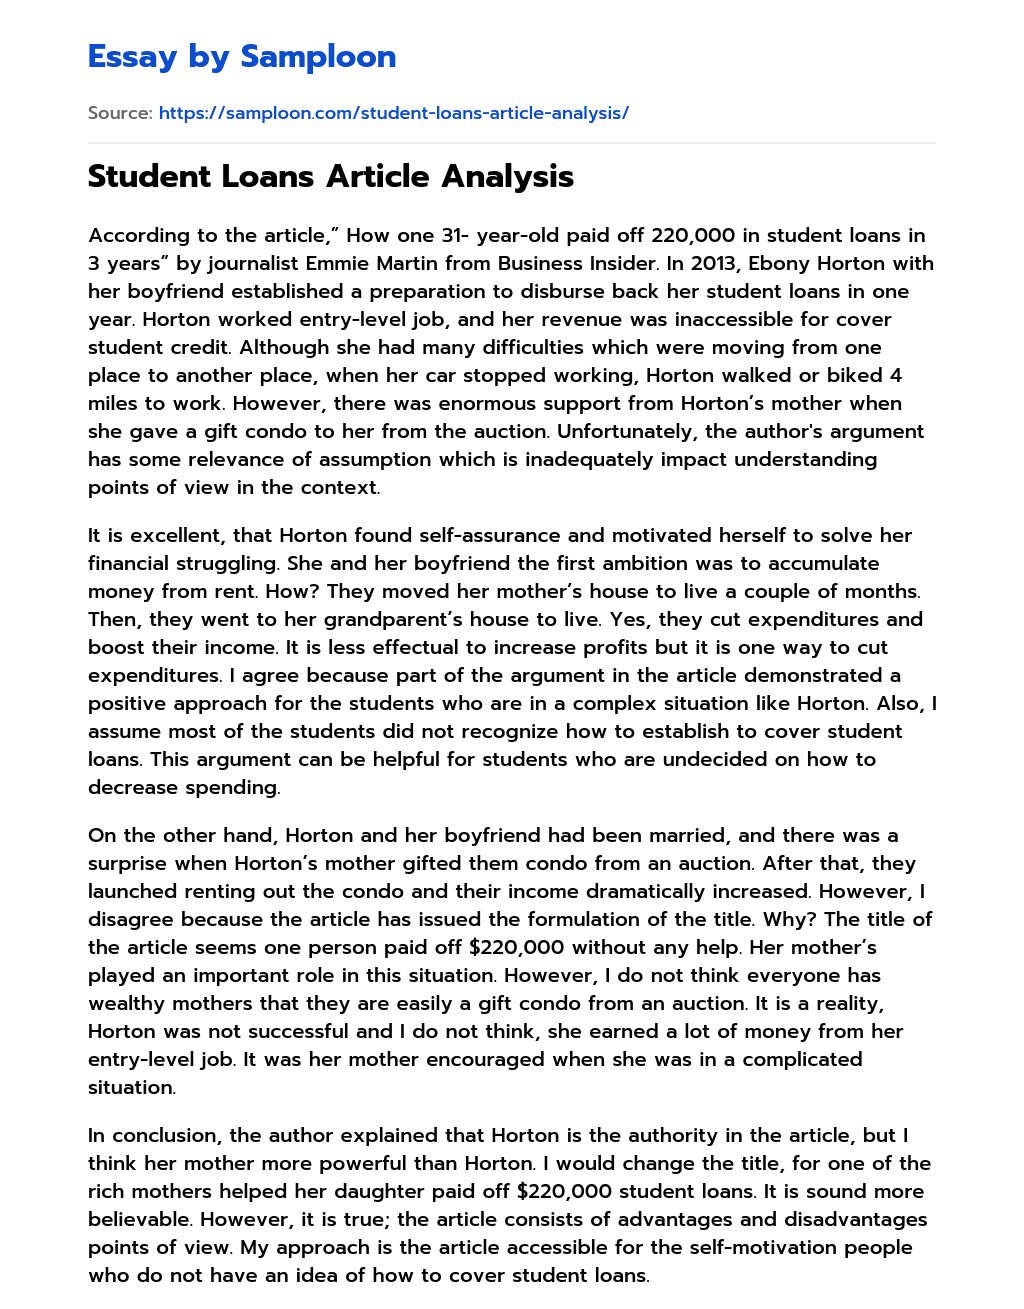 Student Loans Article Analysis essay